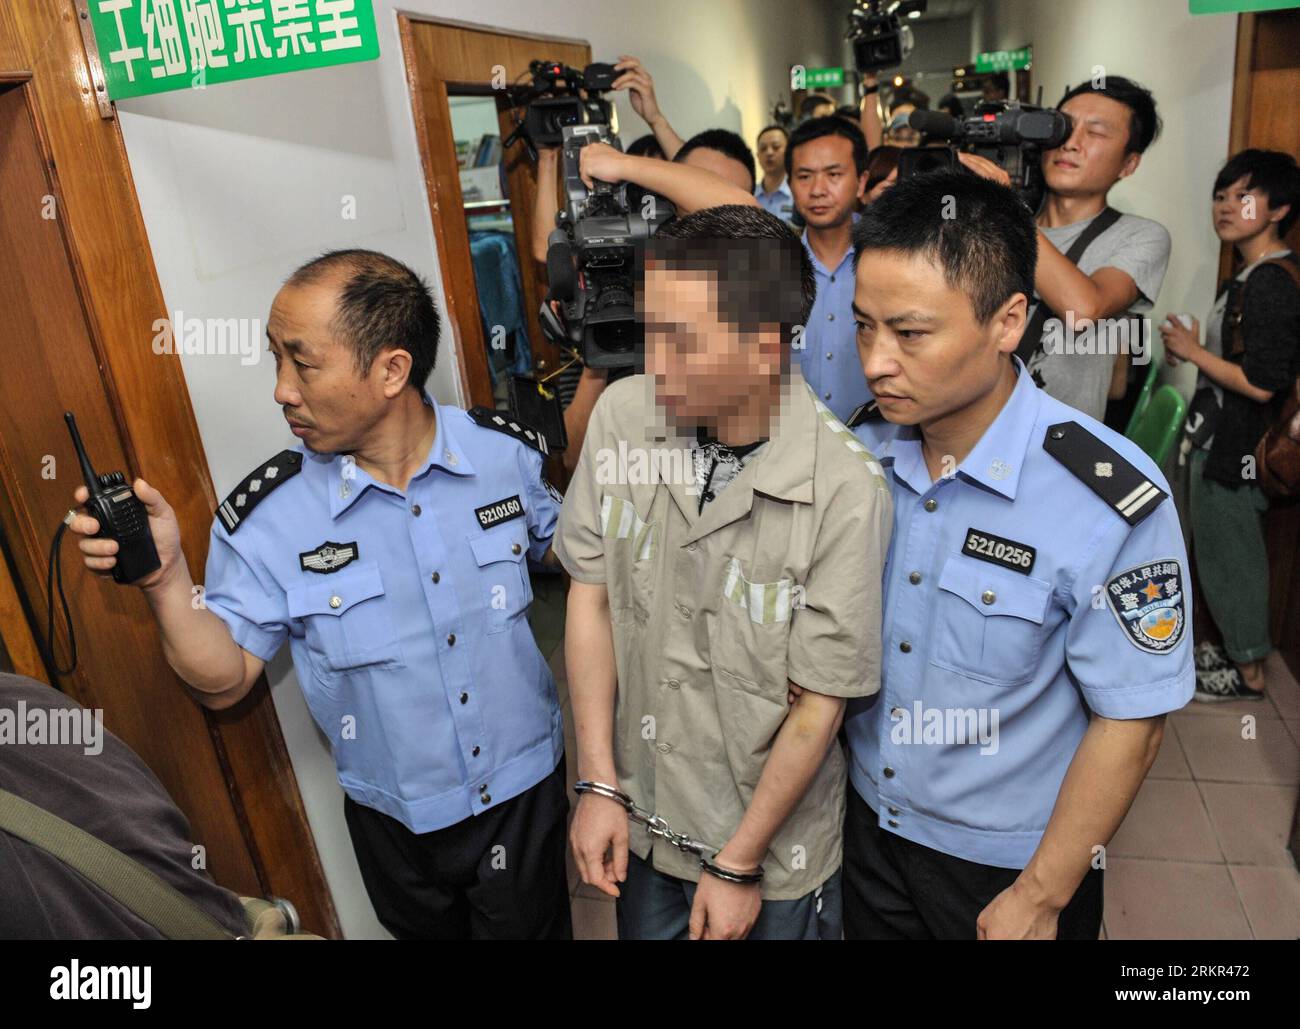 Bildnummer: 58115354  Datum: 18.06.2012  Copyright: imago/Xinhua (120618) -- CHONGQING, June 18, 2012 (Xinhua) -- The prisoner father surnamed Gao (C, front), escorted by two policemen, walks to a room for donating his stem cells to his son Jun Jie at Xinqiao Hospital in Chongqing, southwest China, June 14, 2012. A family is facing an anxious wait to see whether a bone marrow transplant, made possible by the incarcerated father s rare trans-provincial prison transfer, has saved their son s life PUBLICATIONxNOTxINxCHN Gesellschaft Fotostory Leukämie Medizin Knochenmarkspende Stammzellen Stammze Stock Photo